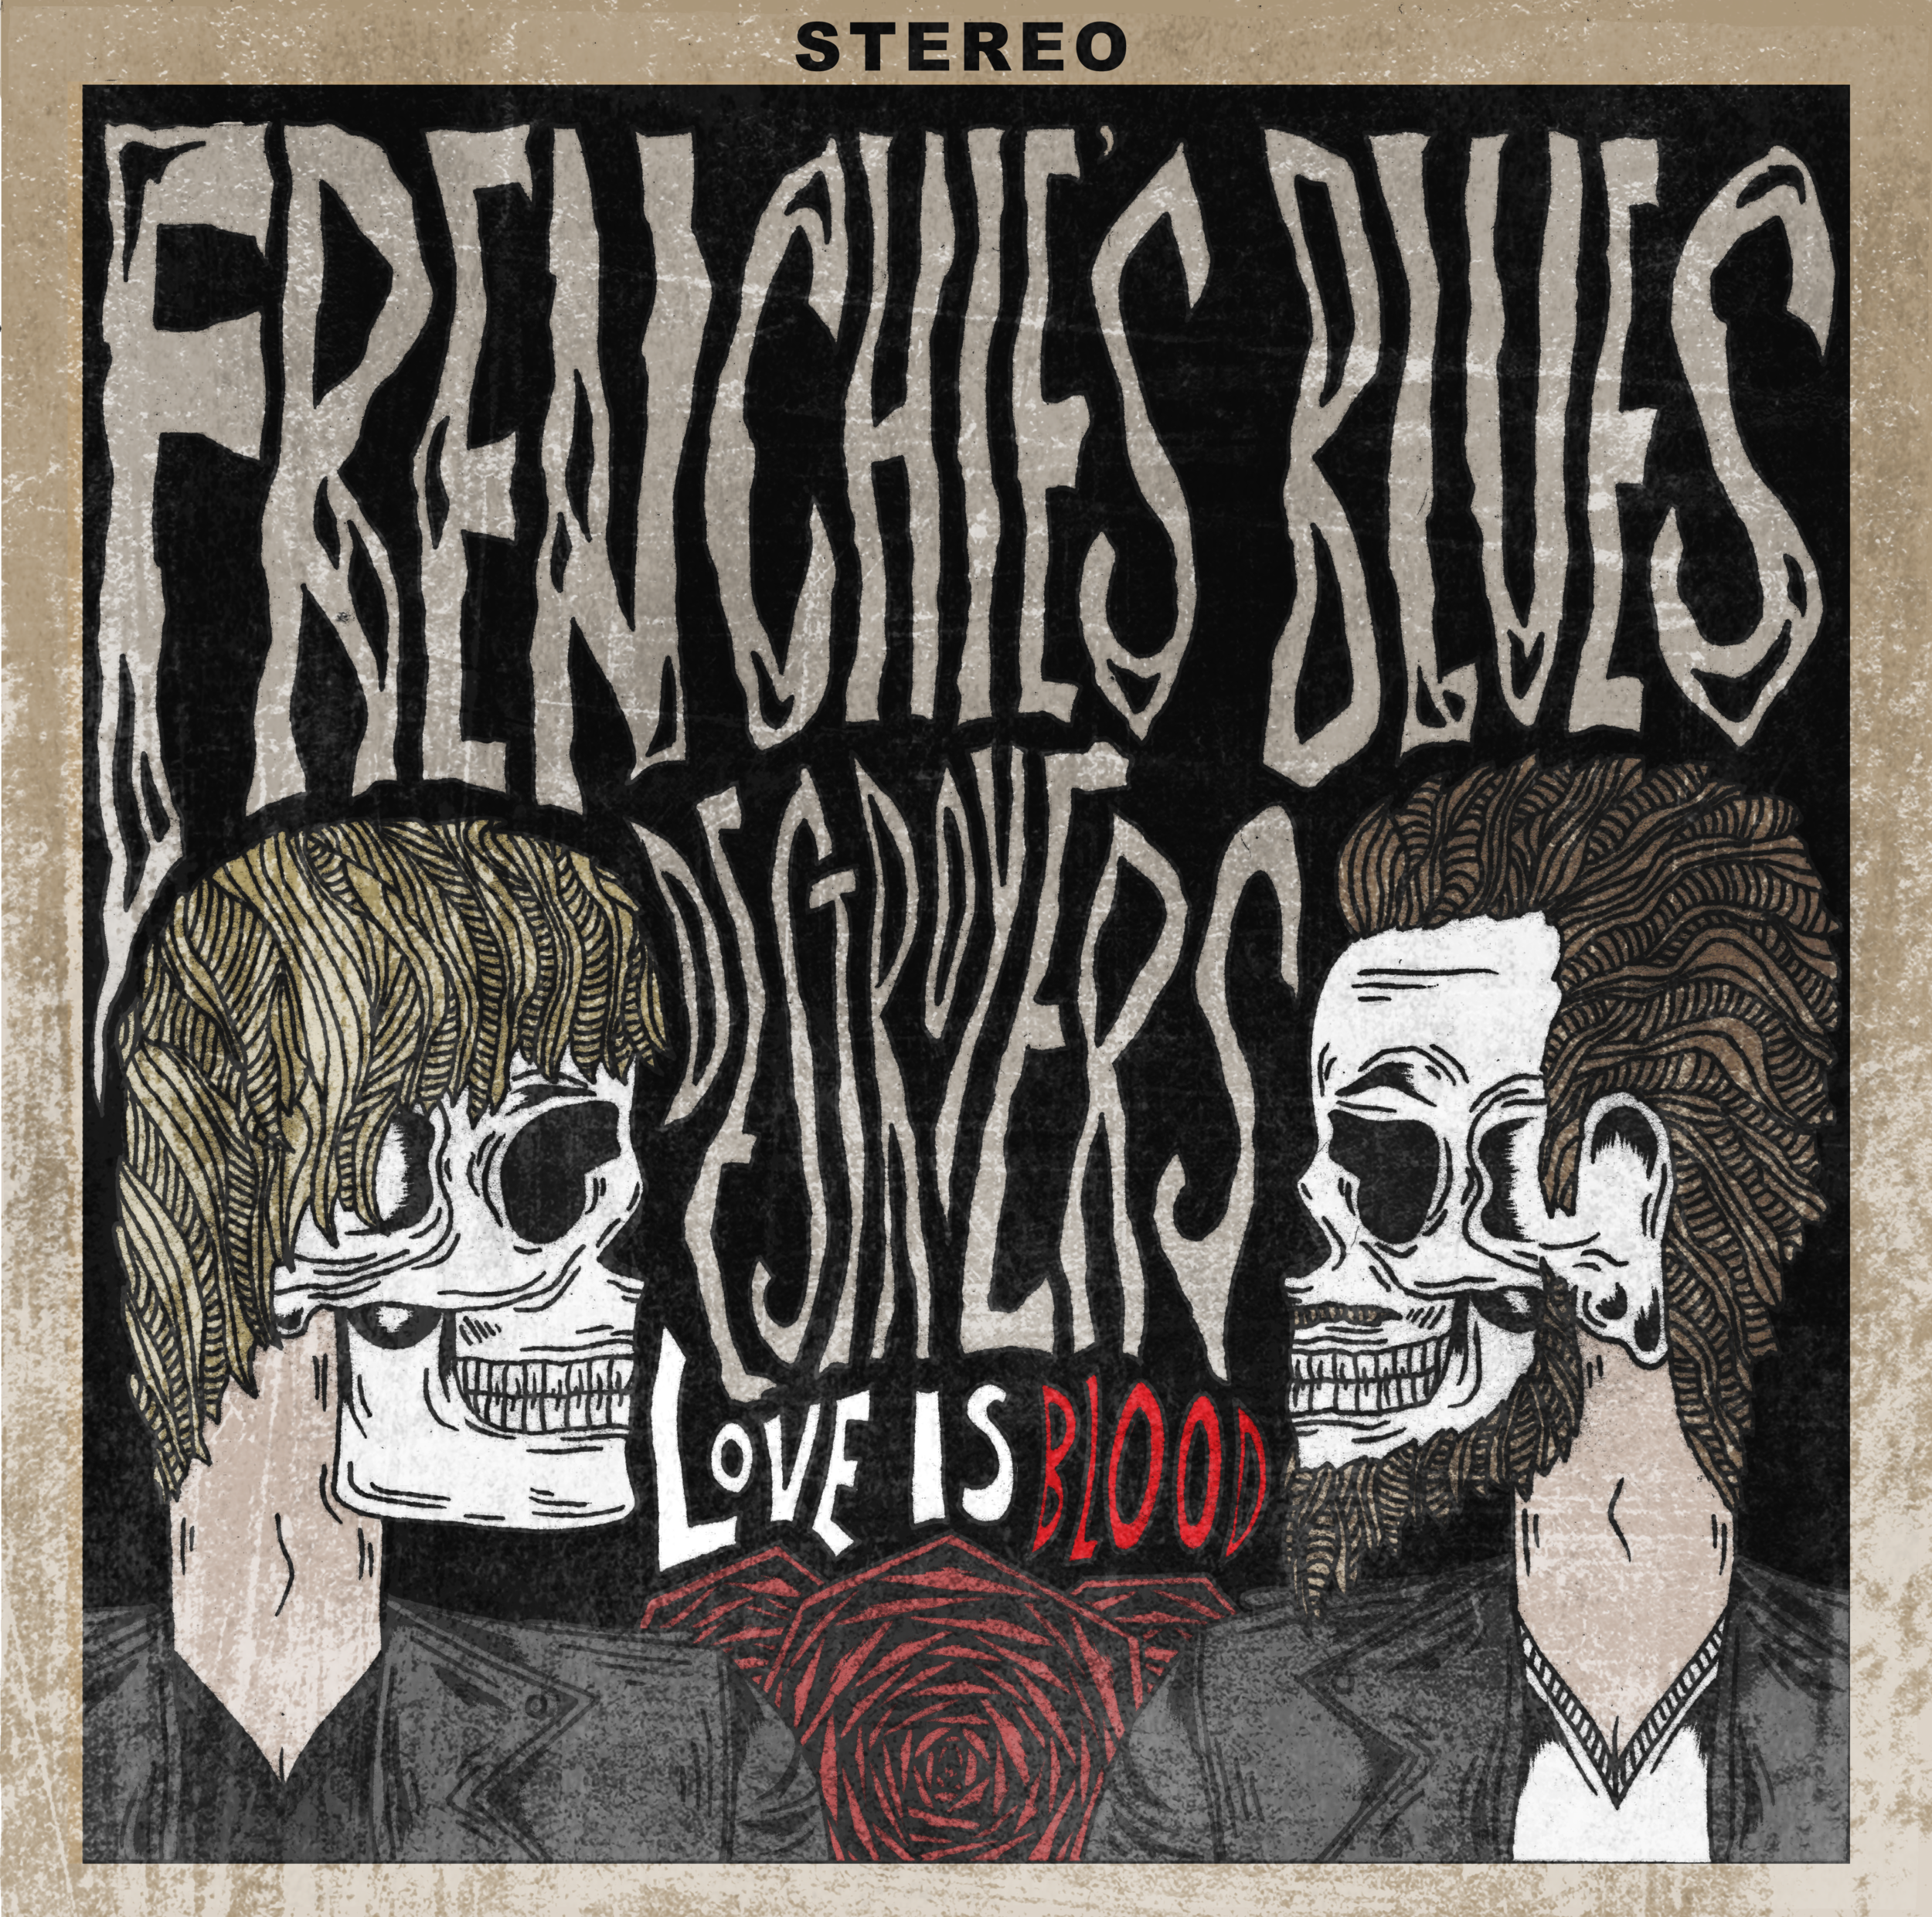 Frenchie's Blues Destroyers "Love Is Blood" Album Cover